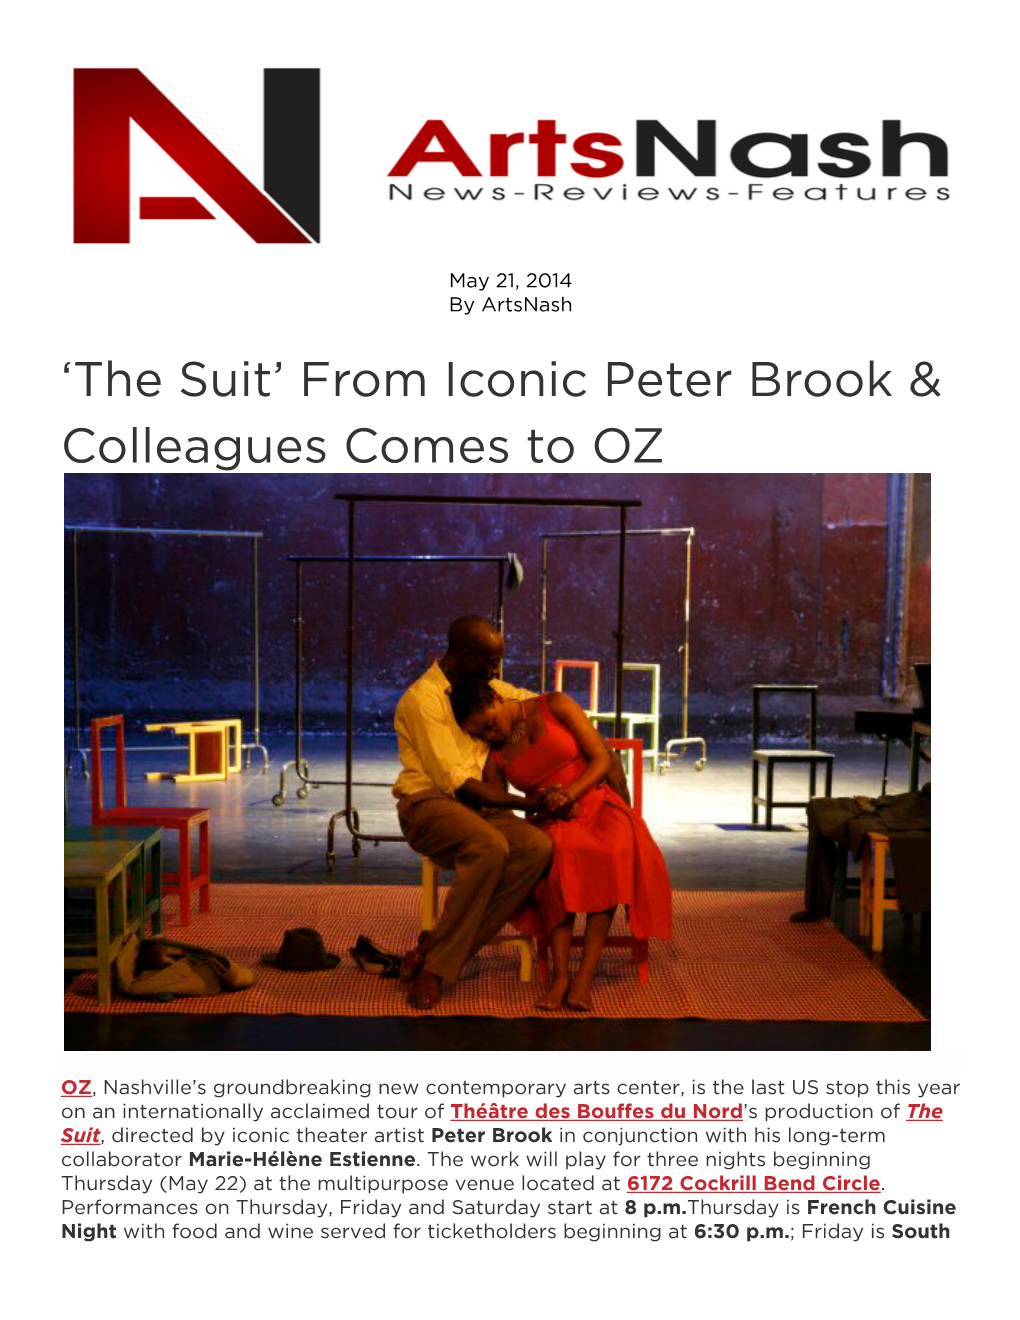 The Suit’ from Iconic Peter Brook & Colleagues Comes to OZ